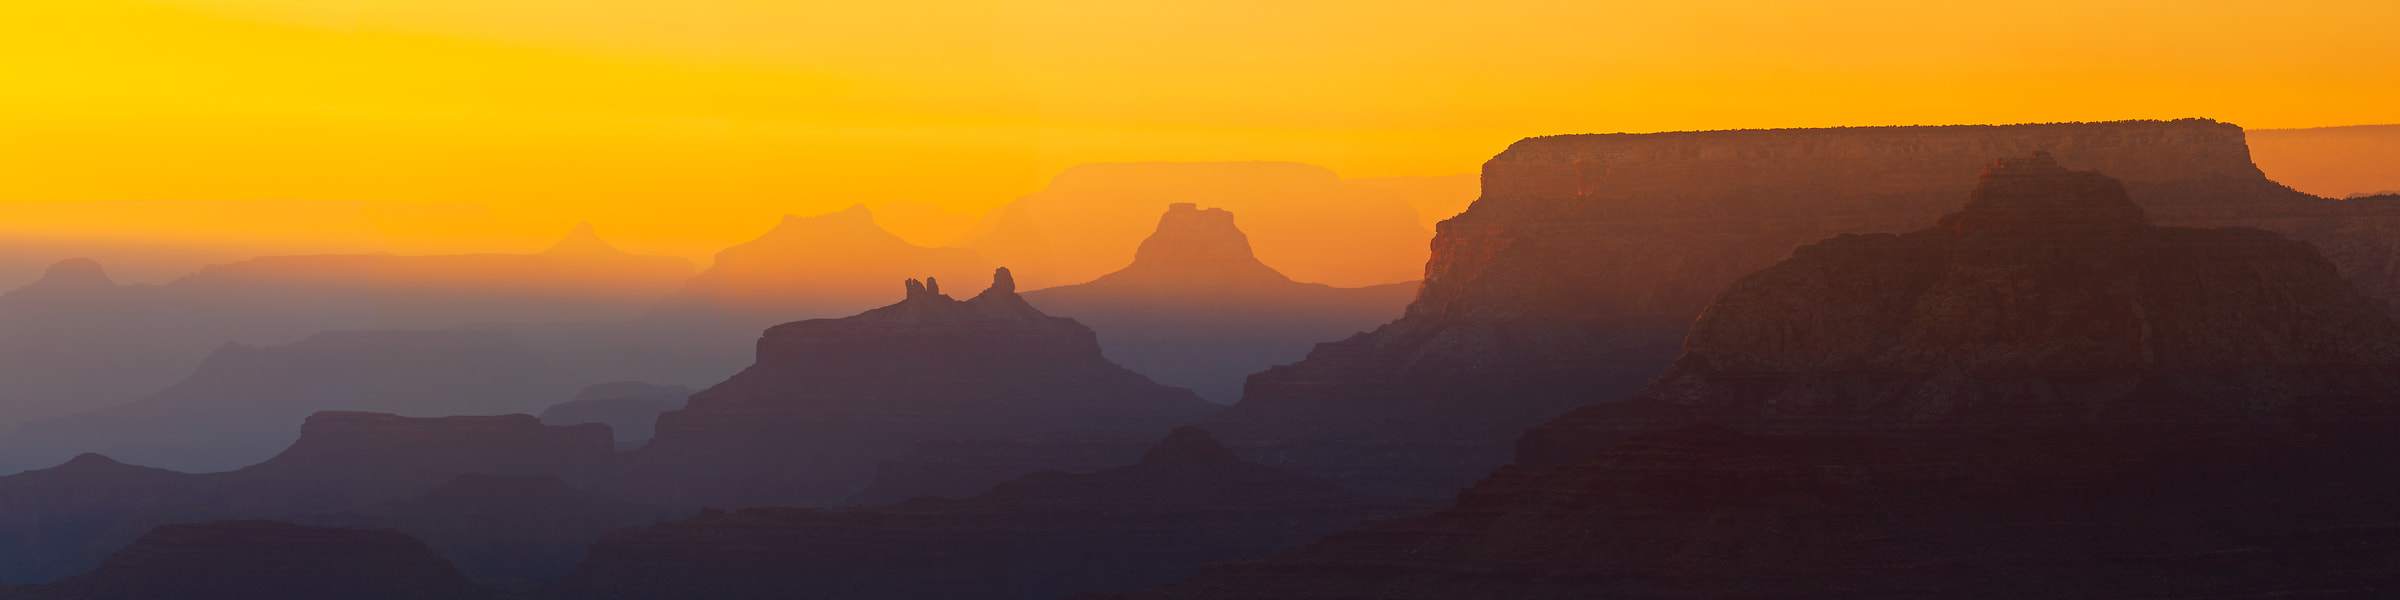 106 megapixels! A very high resolution, large-format VAST photo print of the Grand Canyon at sunset; panorama photograph created by Phillip Noll in Grand Canyon National Park, Arizona.